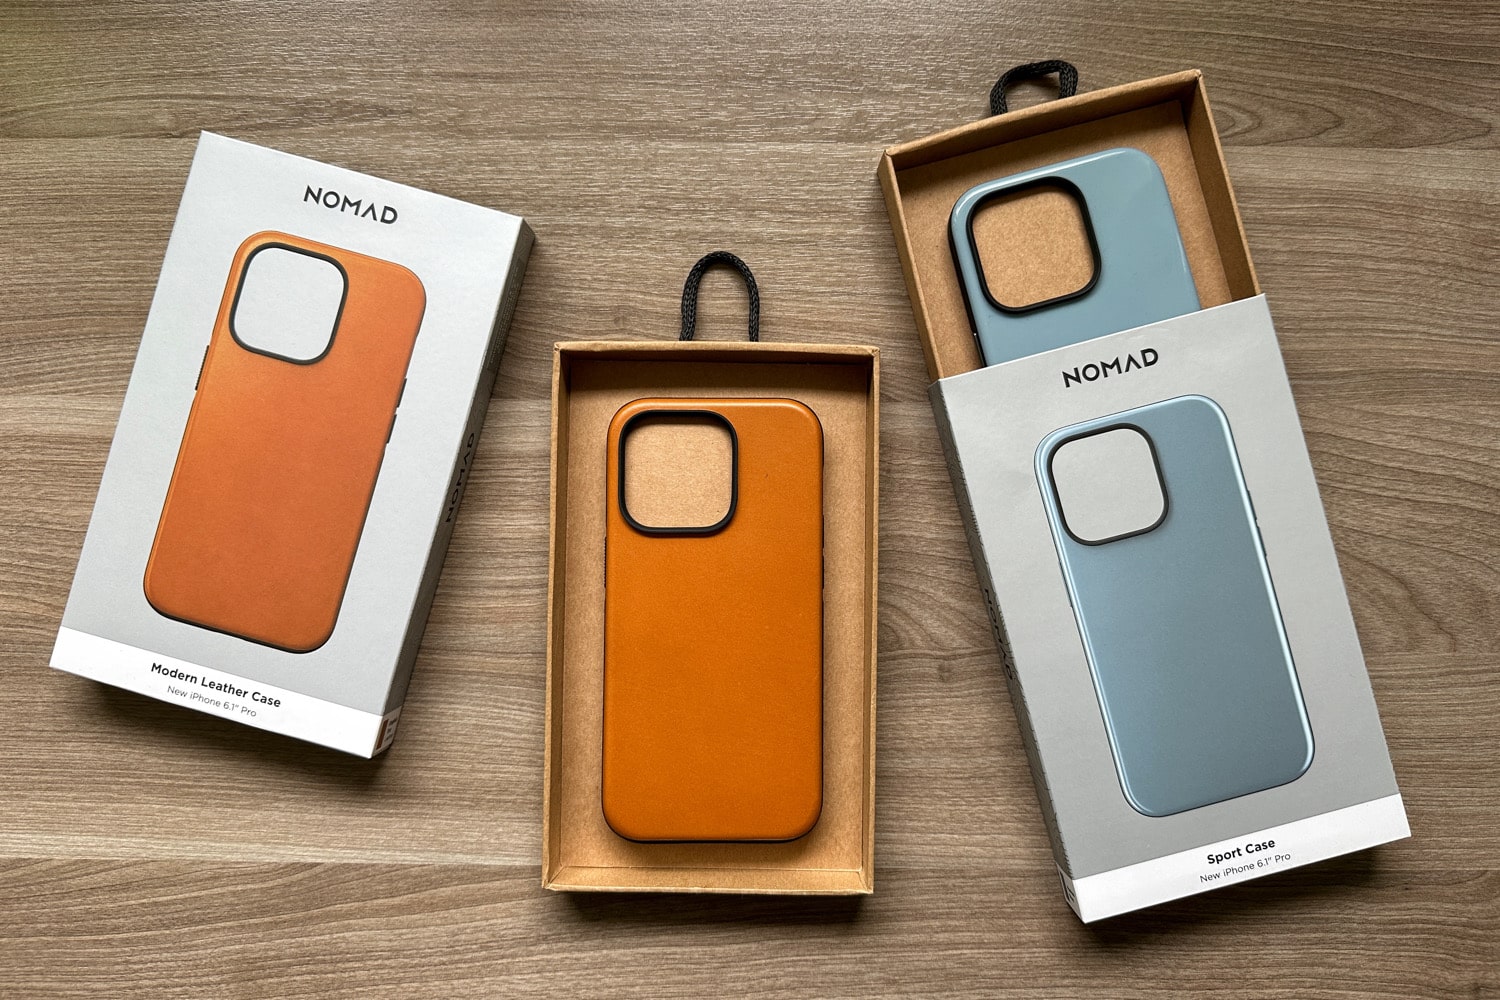 Iphone 14 | Accessories for the iPhone 14 Pro: Sport Case & Modern Leather Case by NOMAD | apple iphone | NOMAD iPhone 14 Pro Cases 1